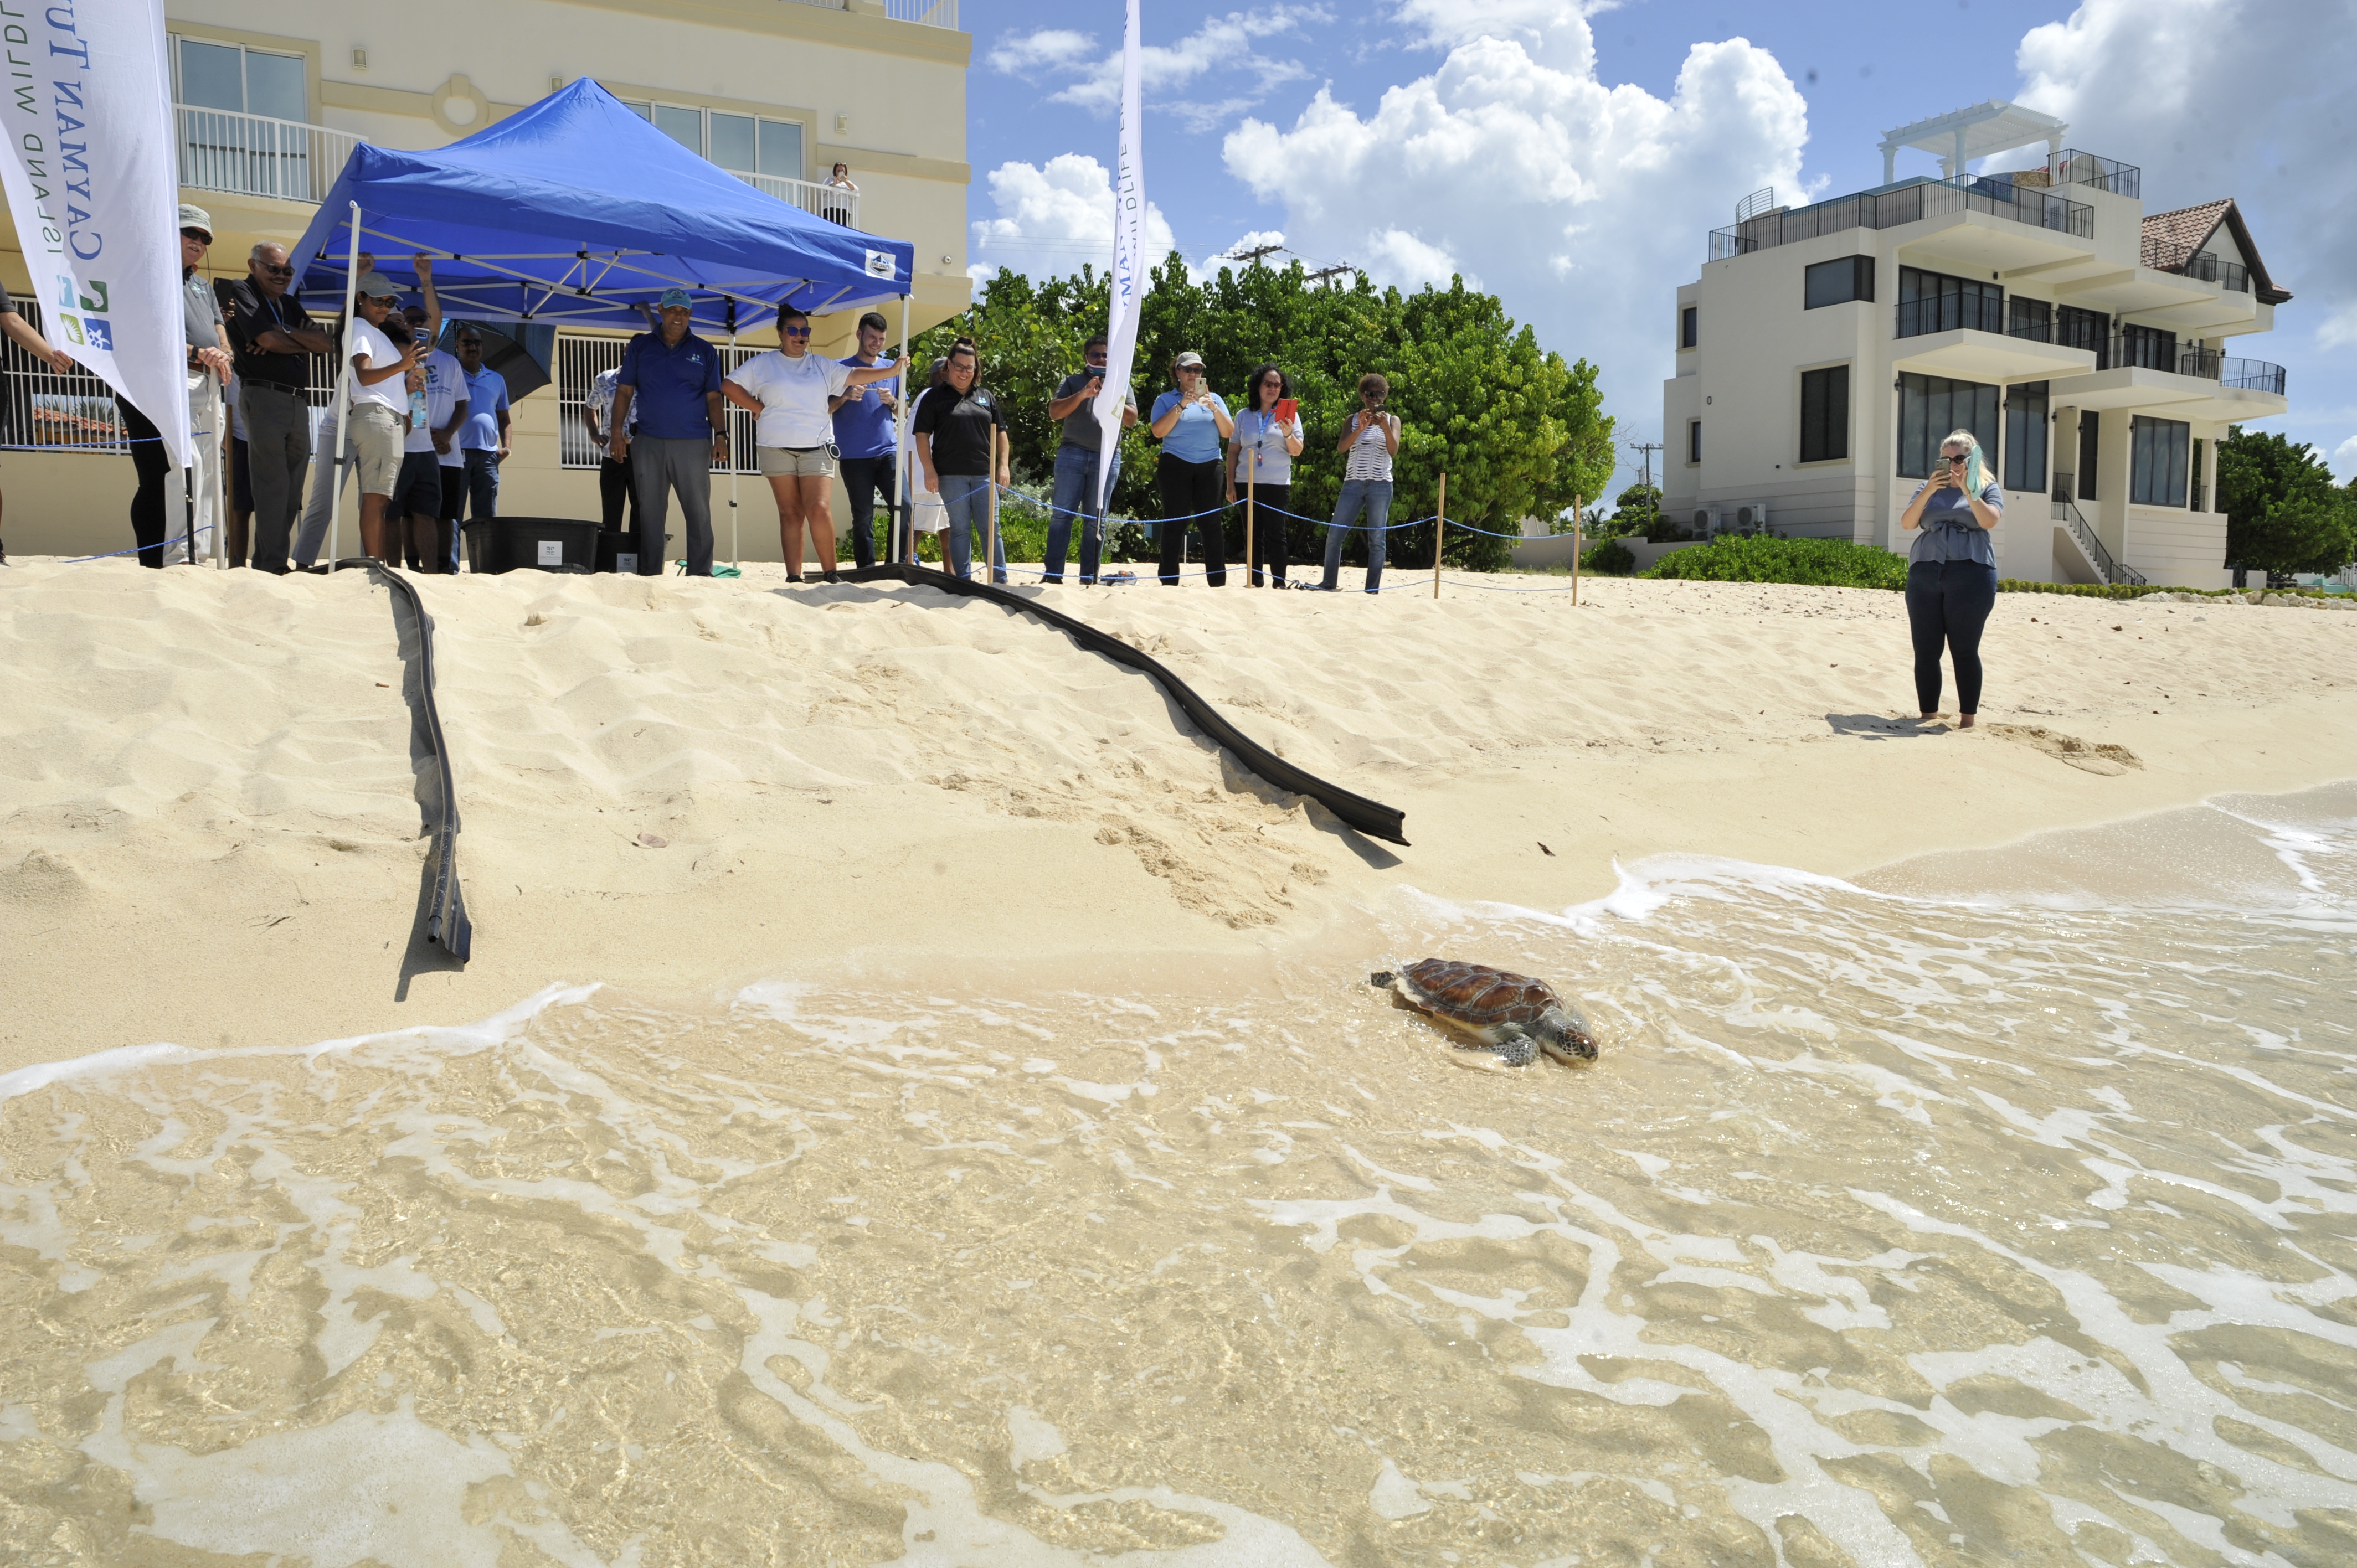 CTC Crew Members gathered to send off 2 Green sea turtles into the wild